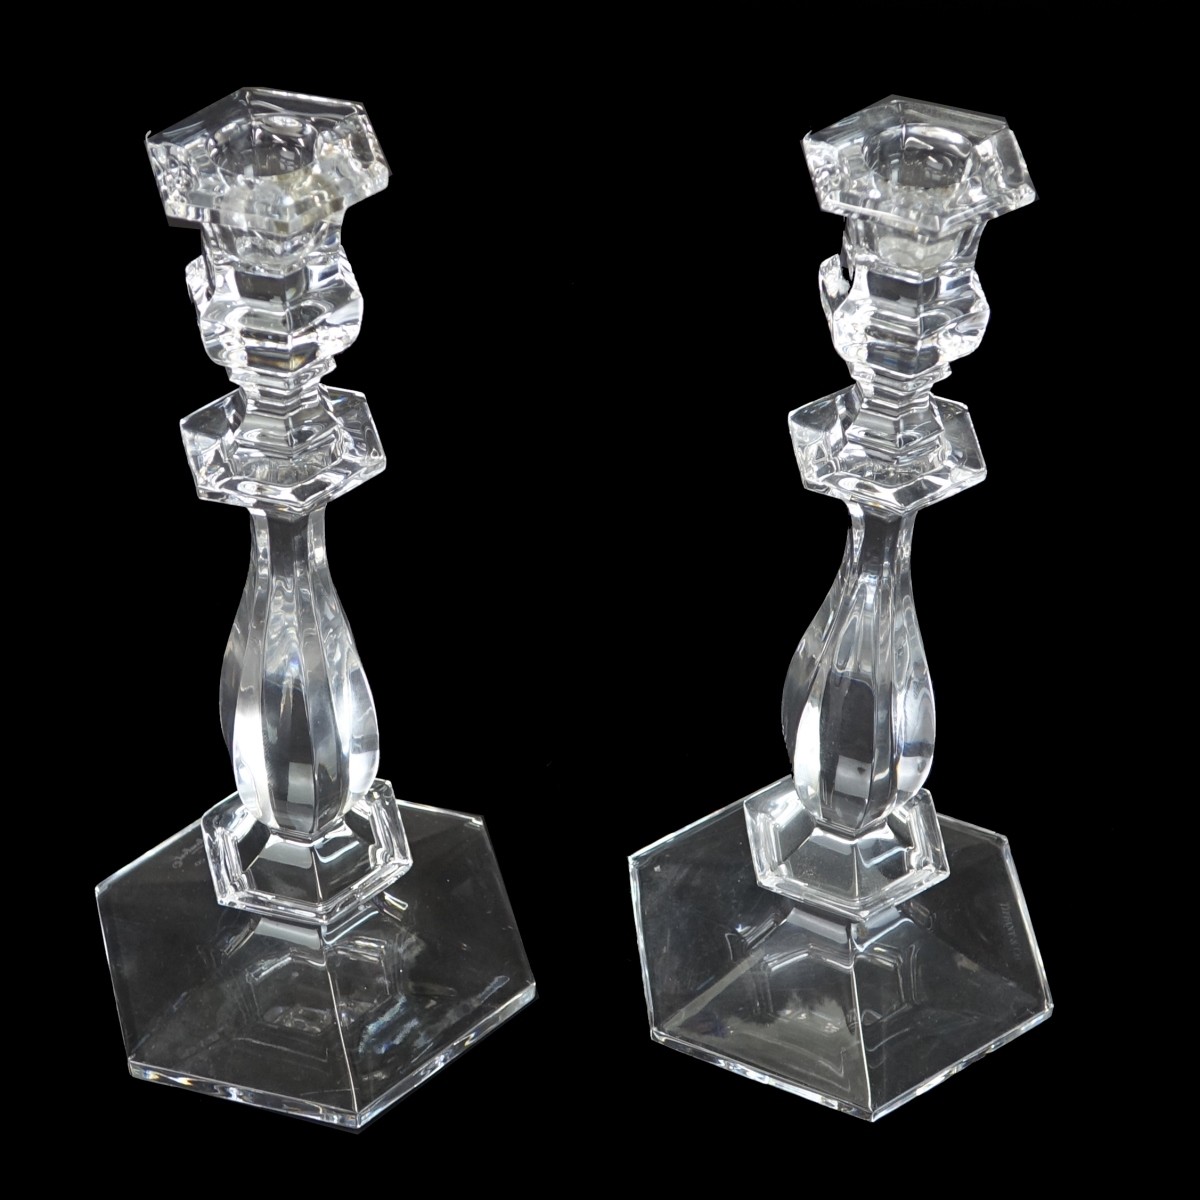 Pair of Tiffany & Co Candlesticks